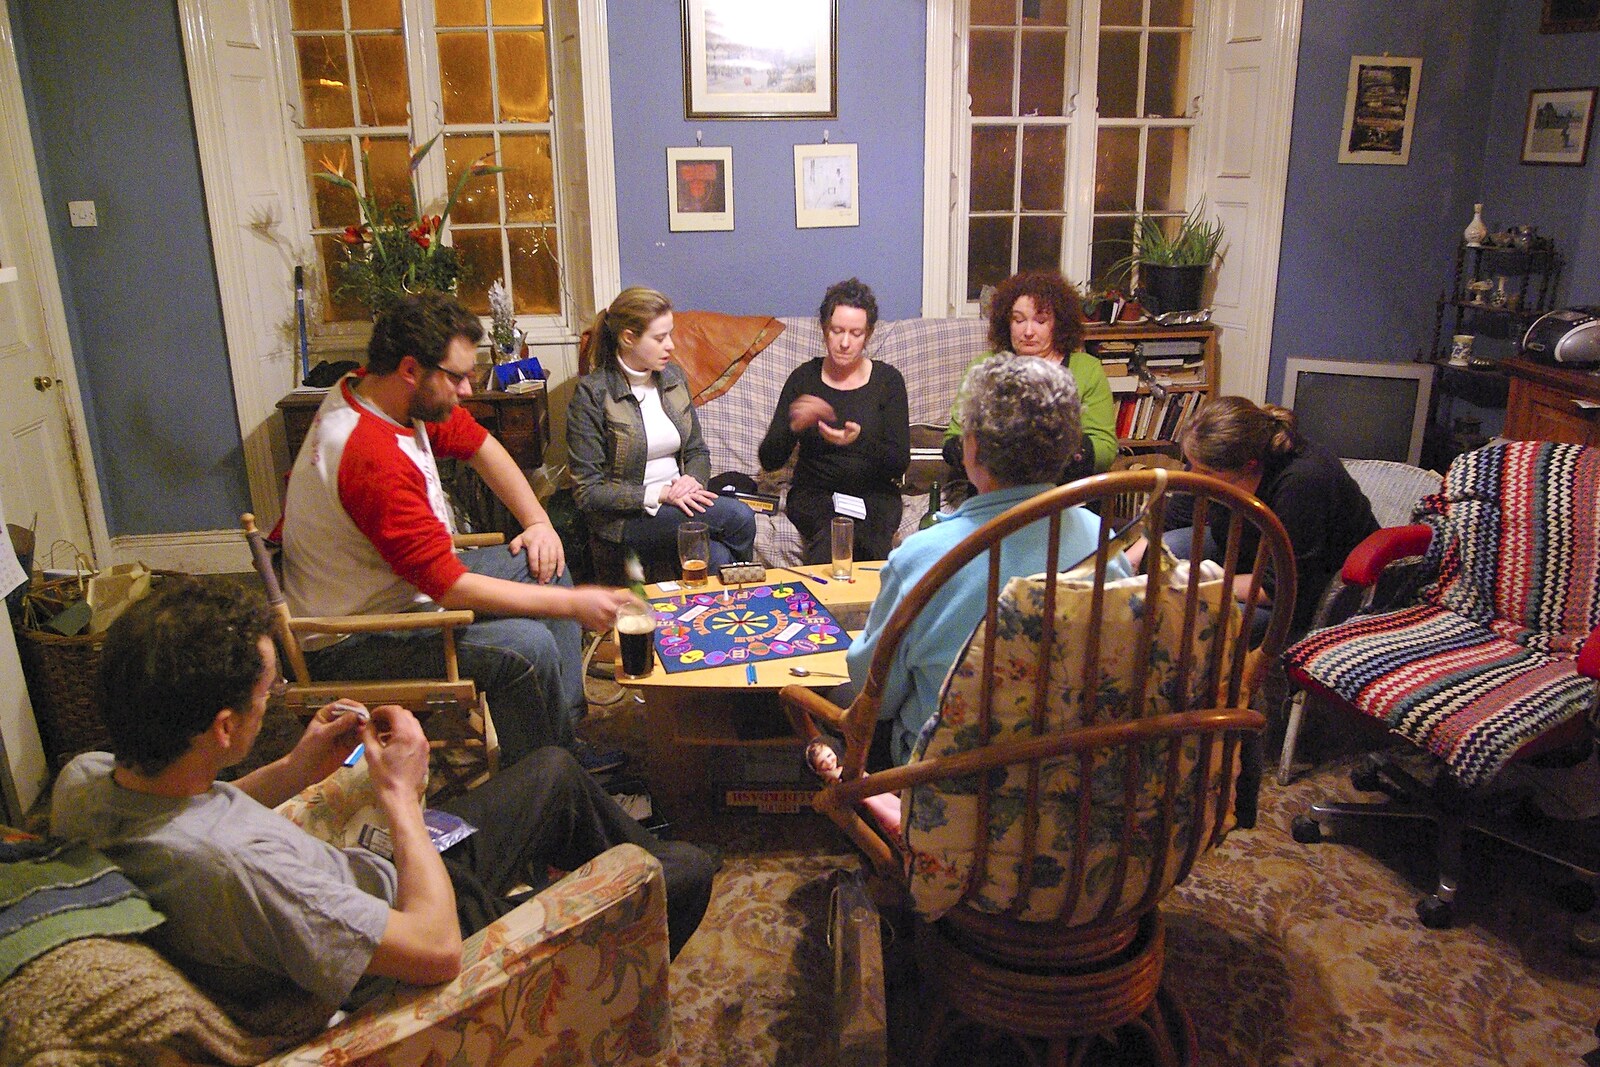 Games in the lounge from The BBs at the Park Hotel, and Christmas in Blackrock, Dublin, Ireland - 25th December 2006